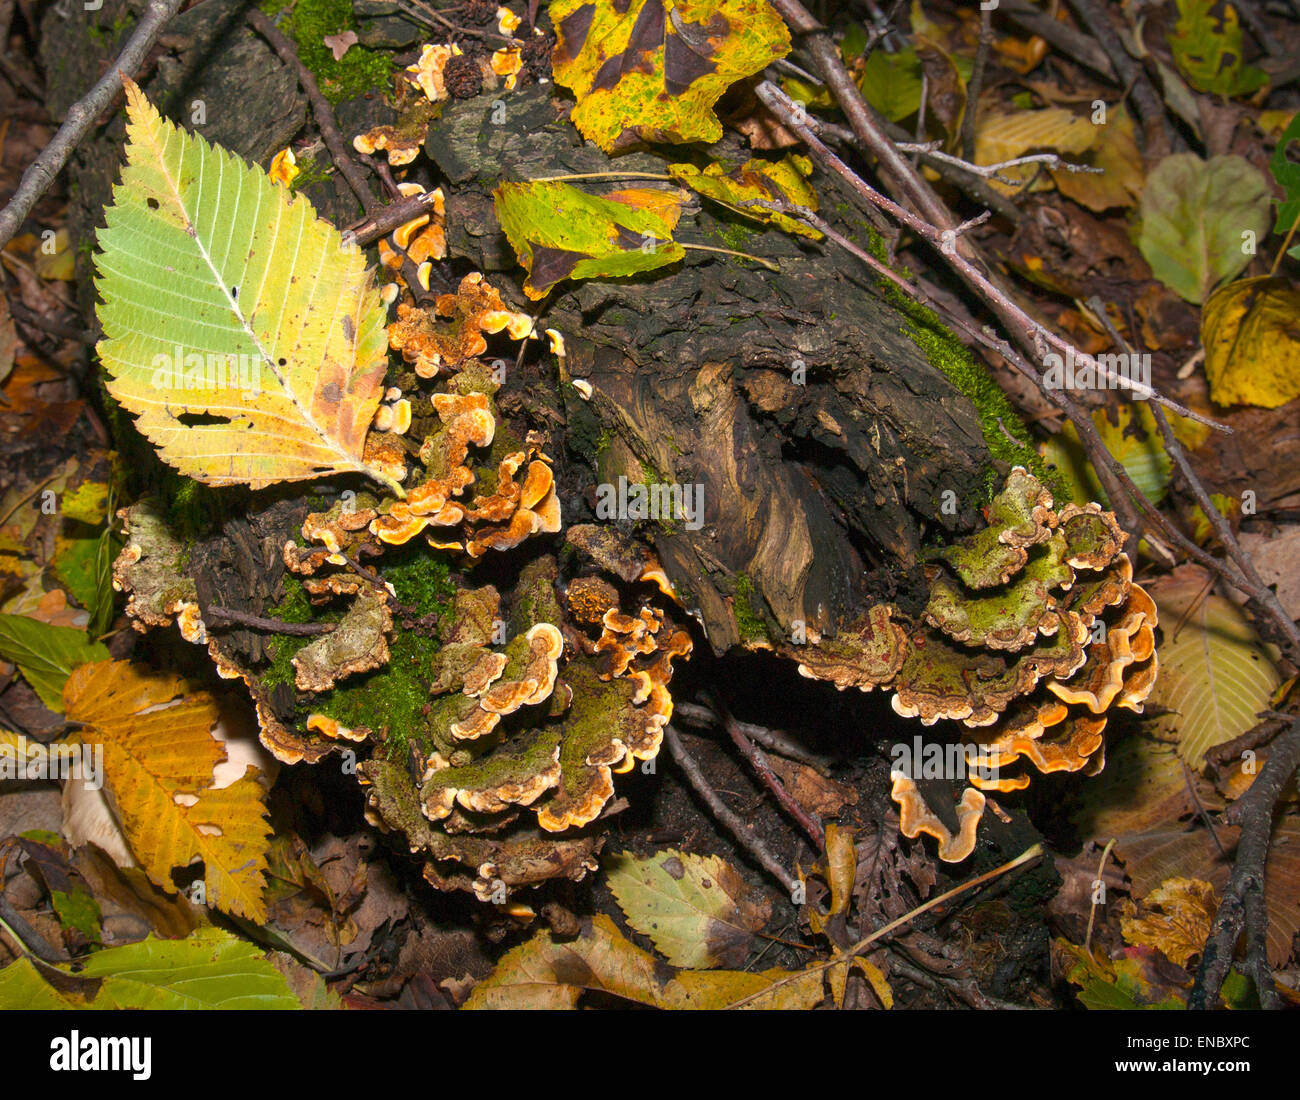 Mushroom(Trametes versicolor)on an old tree stump in autumn in the woods. Stock Photo